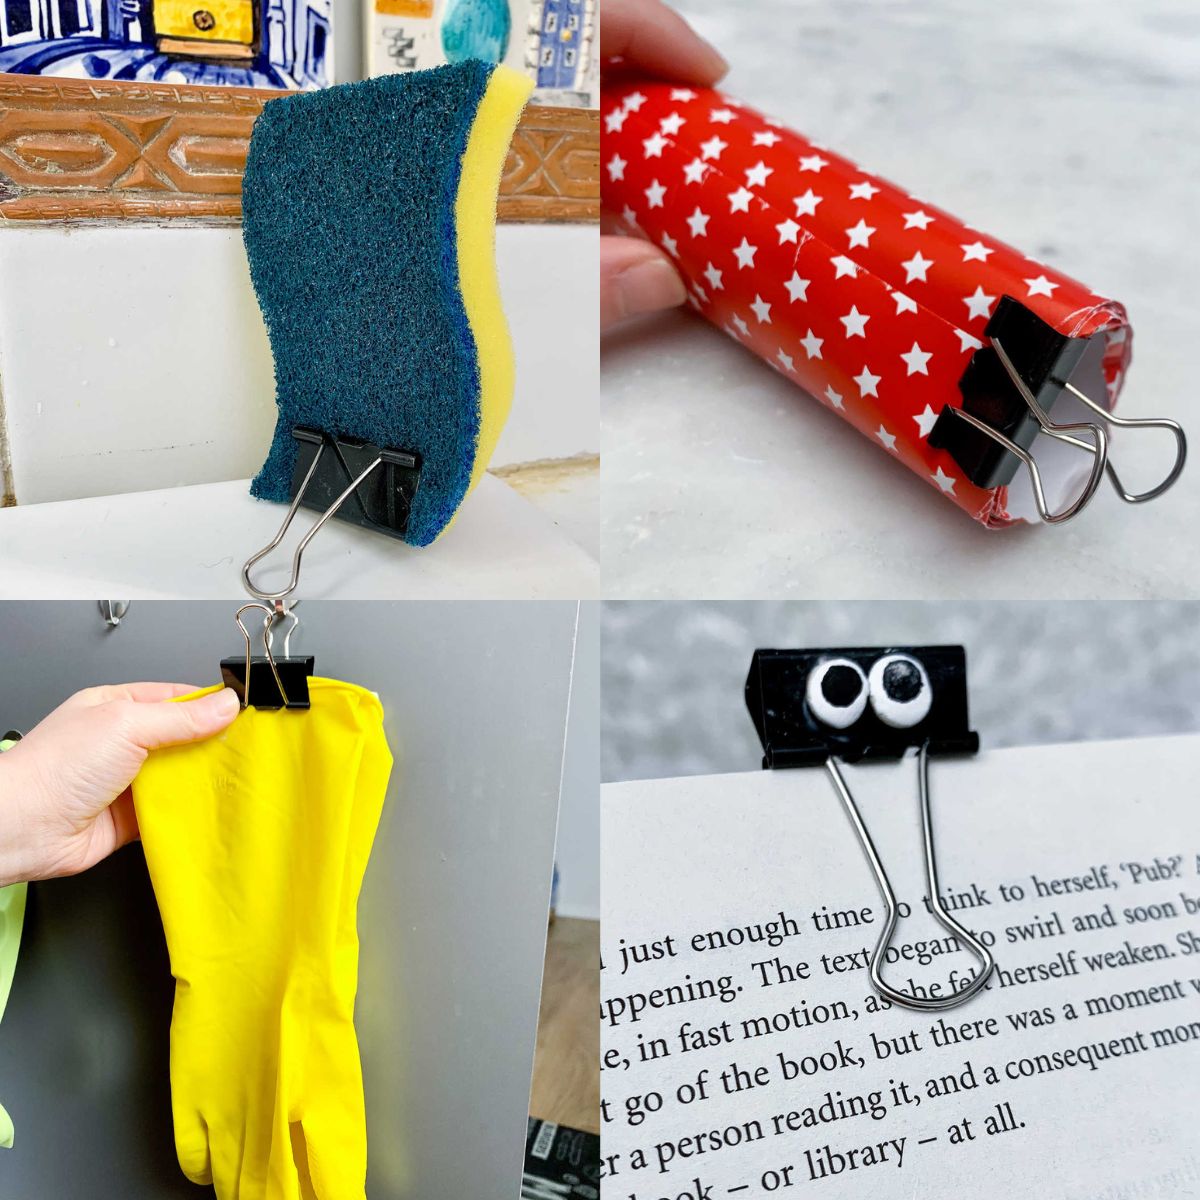 You’re thinking of the right thing–the oversized, more stable paper clip binder clips are very versatile in what they can stabilize.

The binder clip hacks will blow your mind! 😉

#Organizing #BinderClips
 LocalInfoForYou.com/372067/binder-…